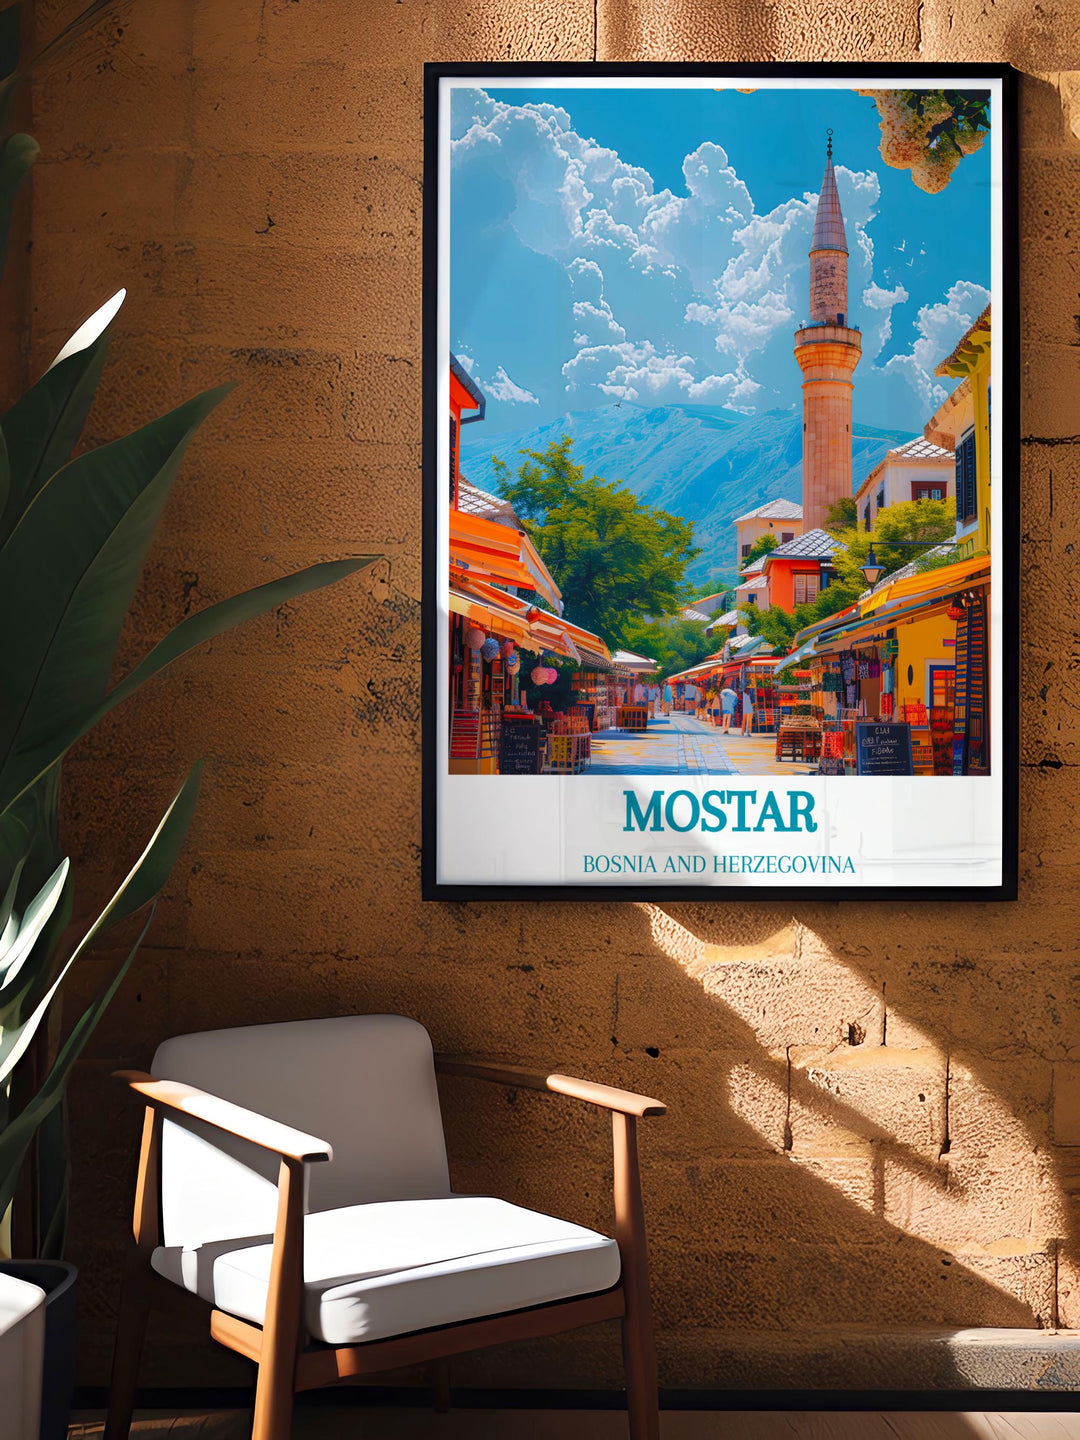 Custom print series featuring dynamic scenes from Mostar and Sarajevo, perfect for adding a touch of Bosnian culture to any decor.